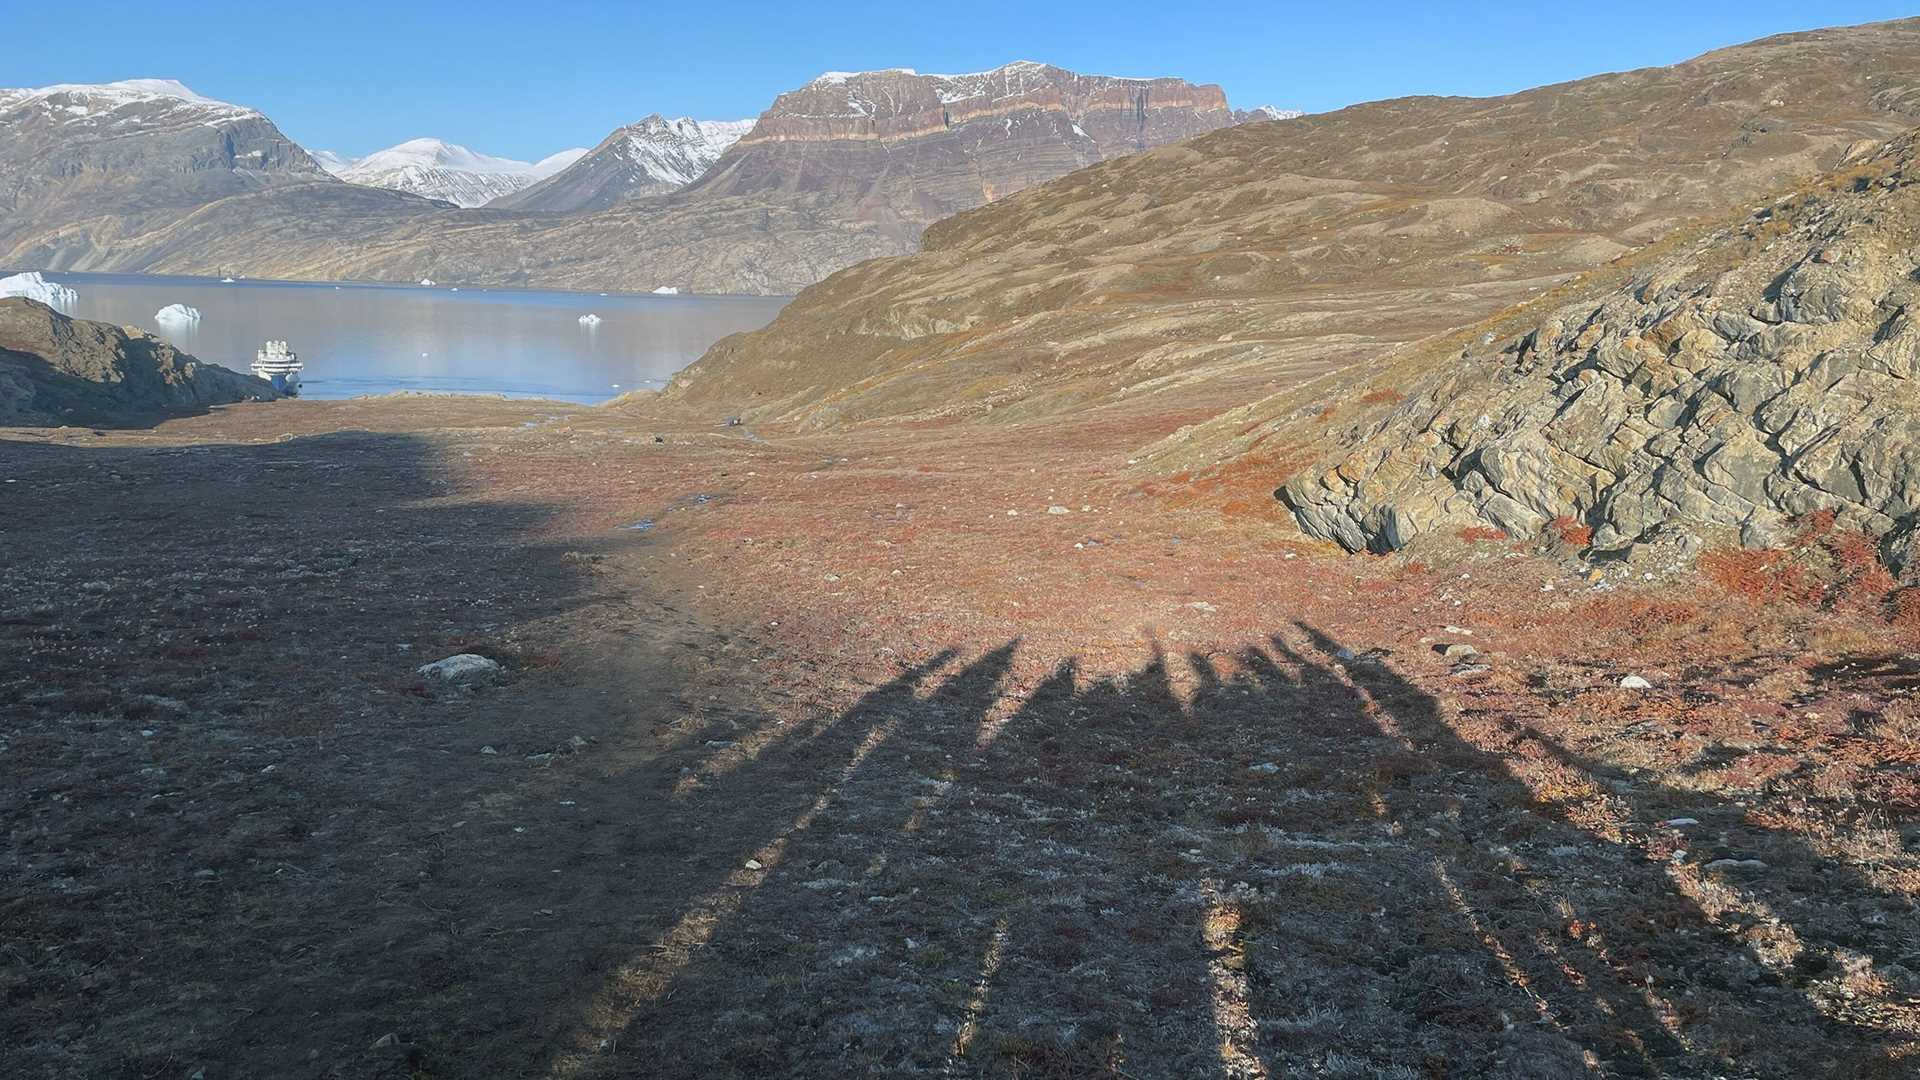 shadows of hikers on a rocky landscape